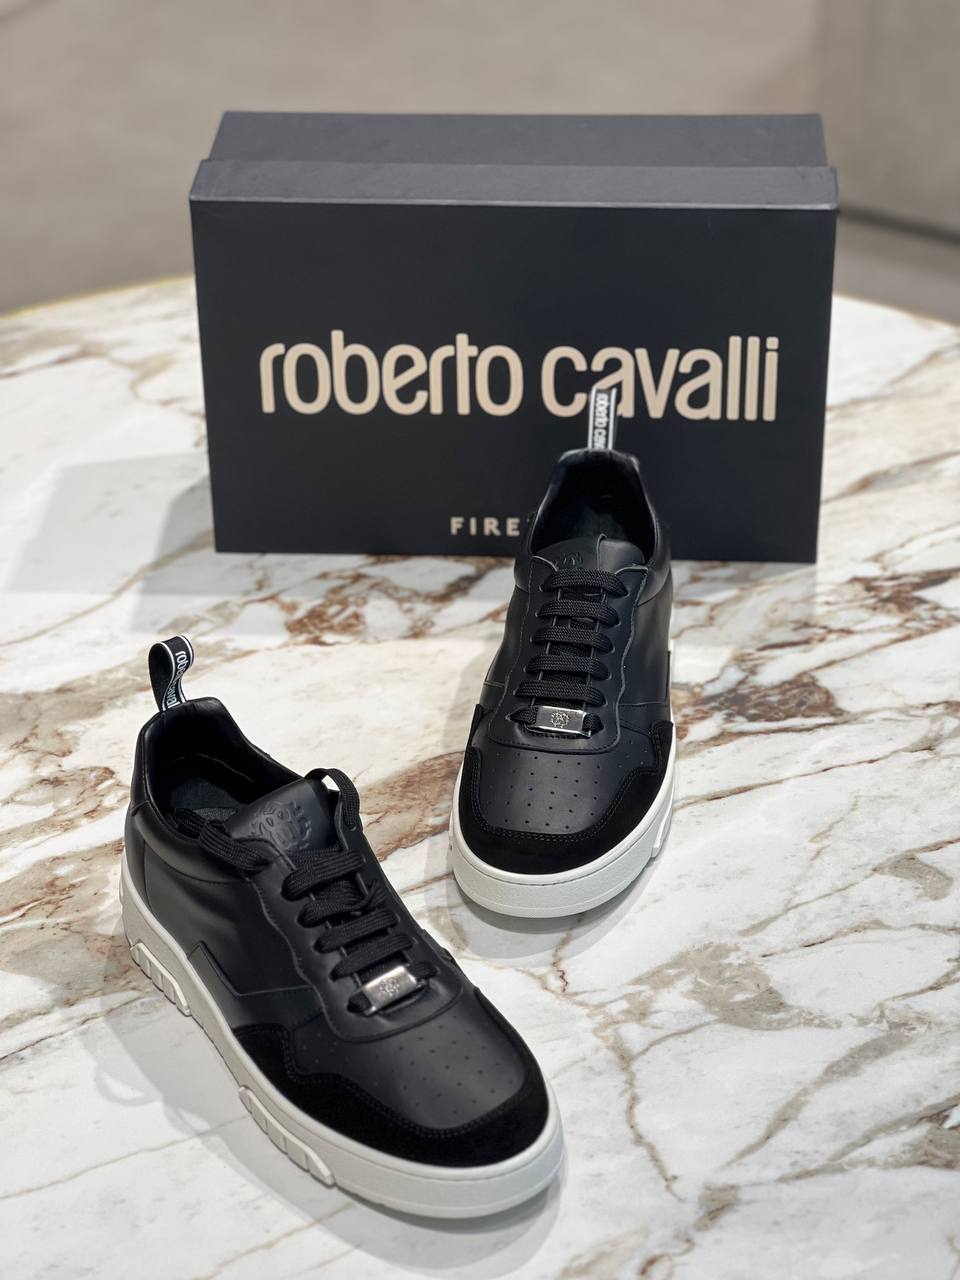 Roberto Cavalli Outlets 5950